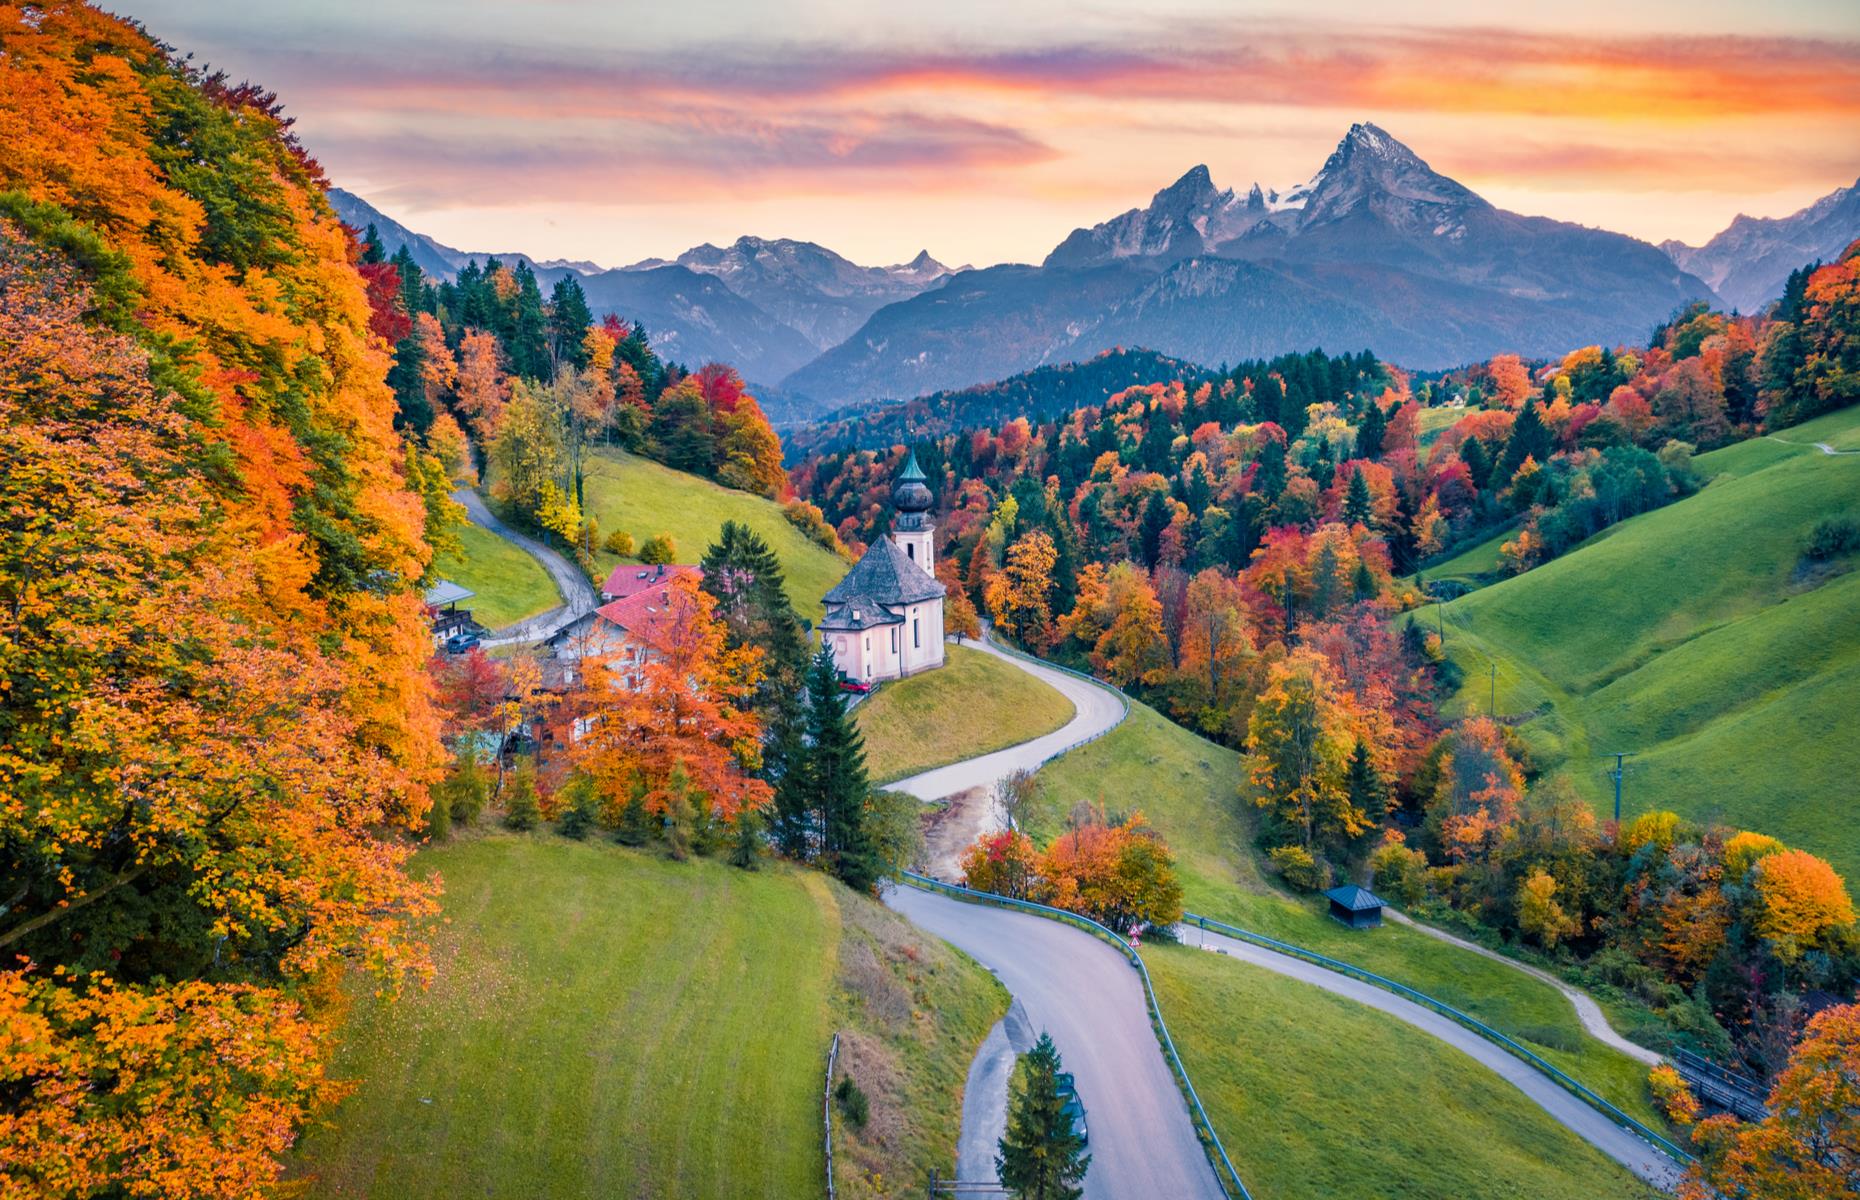 <p>The <a href="https://www.deutsche-alpenstrasse.de/en/home">Alpine route or Alpenstraße</a> is considered among the world’s most spectacularly beautiful drives, carving and curving through the Bavarian Alps and packing in breathtaking scenery. The roughly 175-mile (283km) journey from Munich to Lindau, via the stunning mountain town of Berchtesgaden (pictured), covers some of the best of it, passing dozens of castles, mountain peaks and limpid lakes. It also links up several dreamy spa towns and chocolate-box villages like Oberammergau.</p>